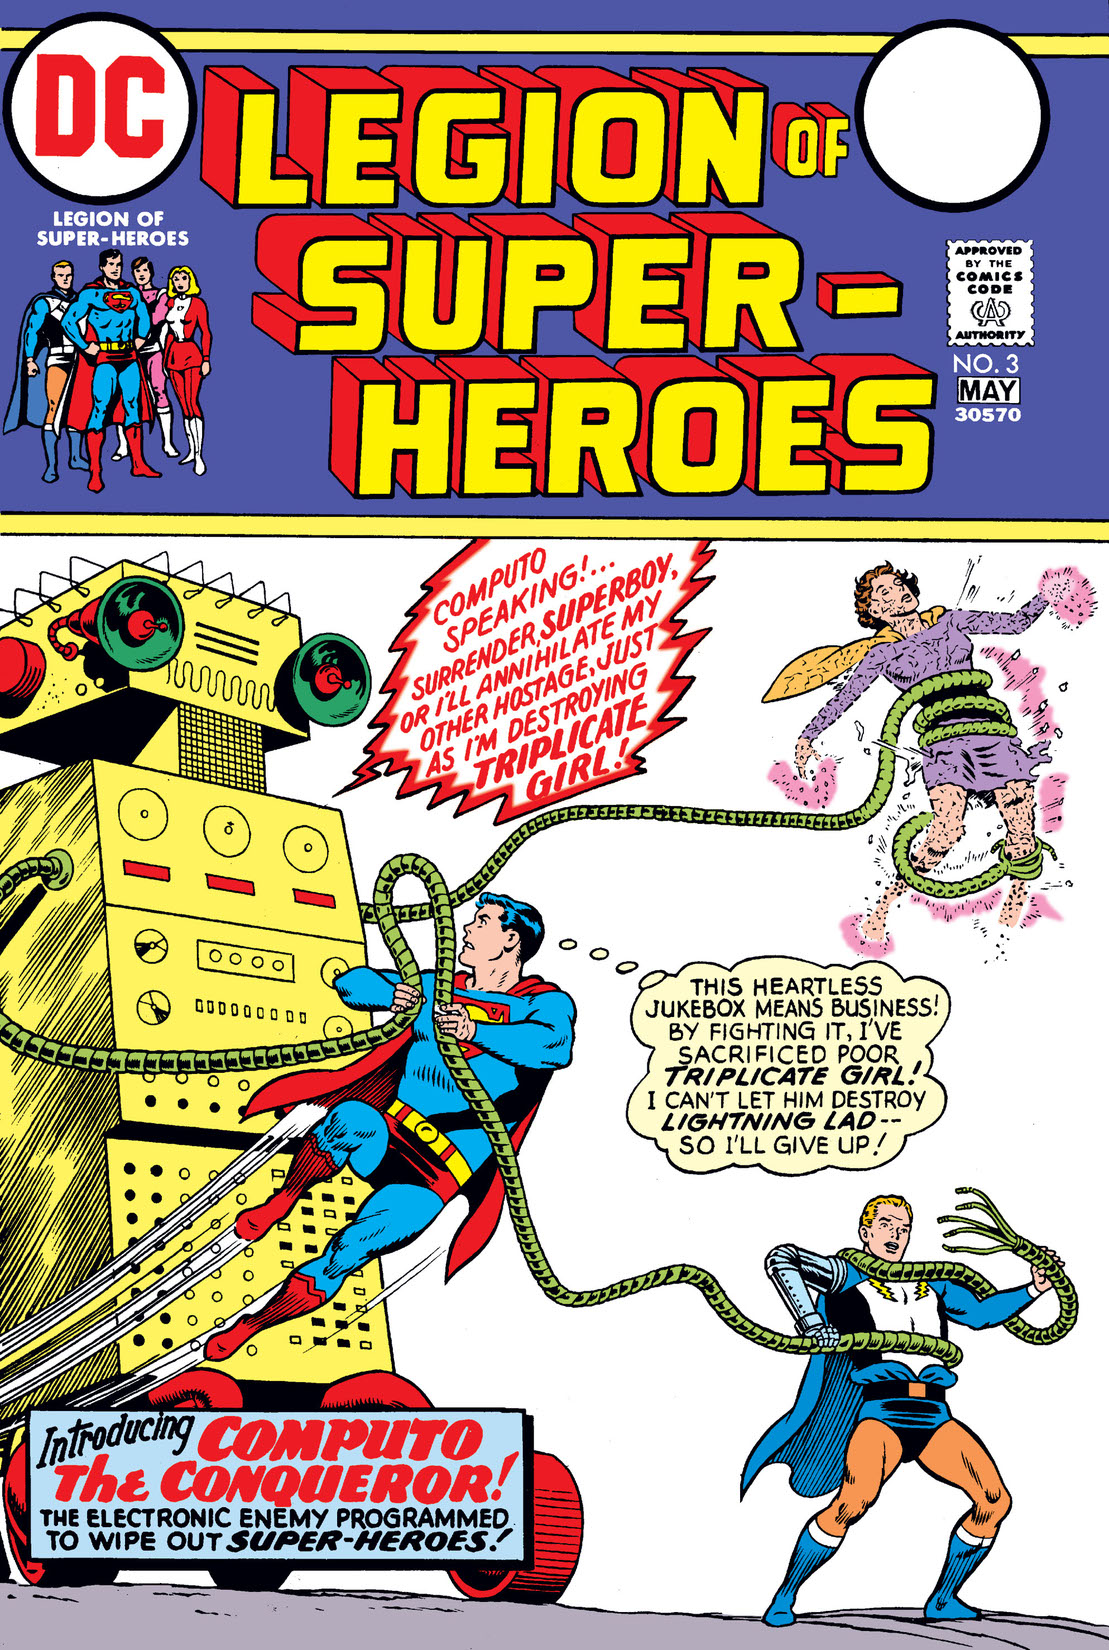 Legion of Super-Heroes (1973-1973) #3 preview images